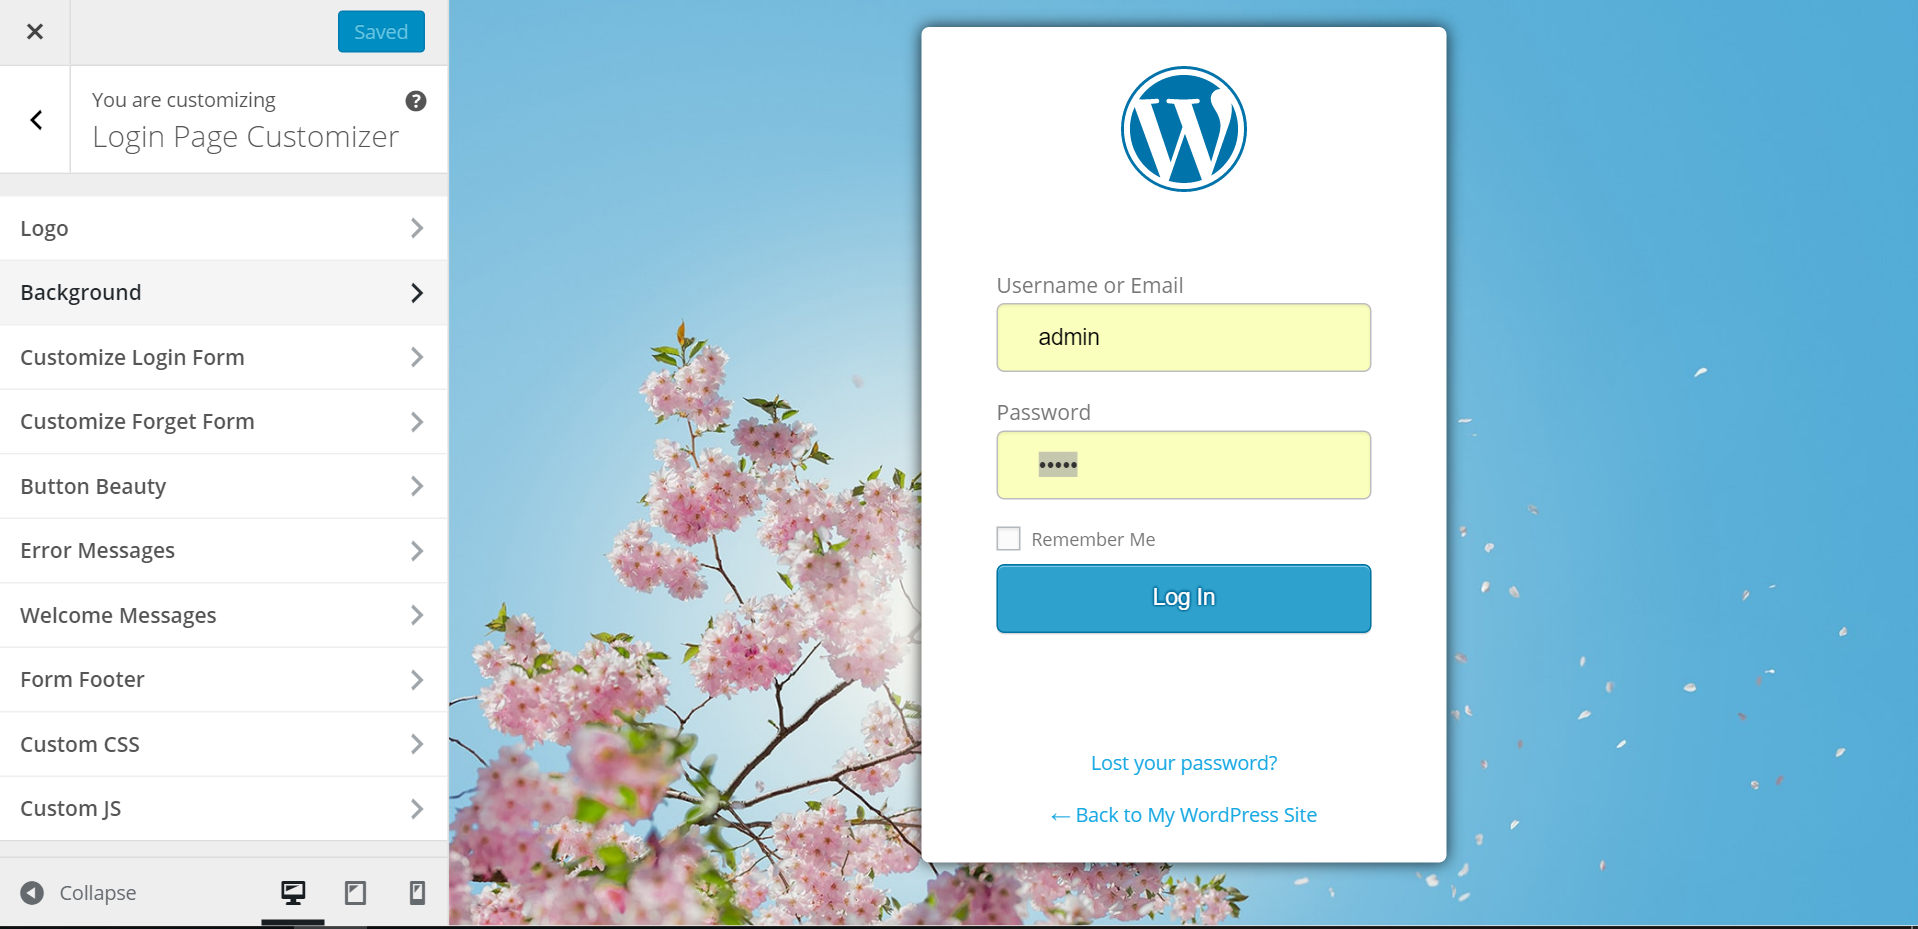 Custom Login page Example #1 with Default Background